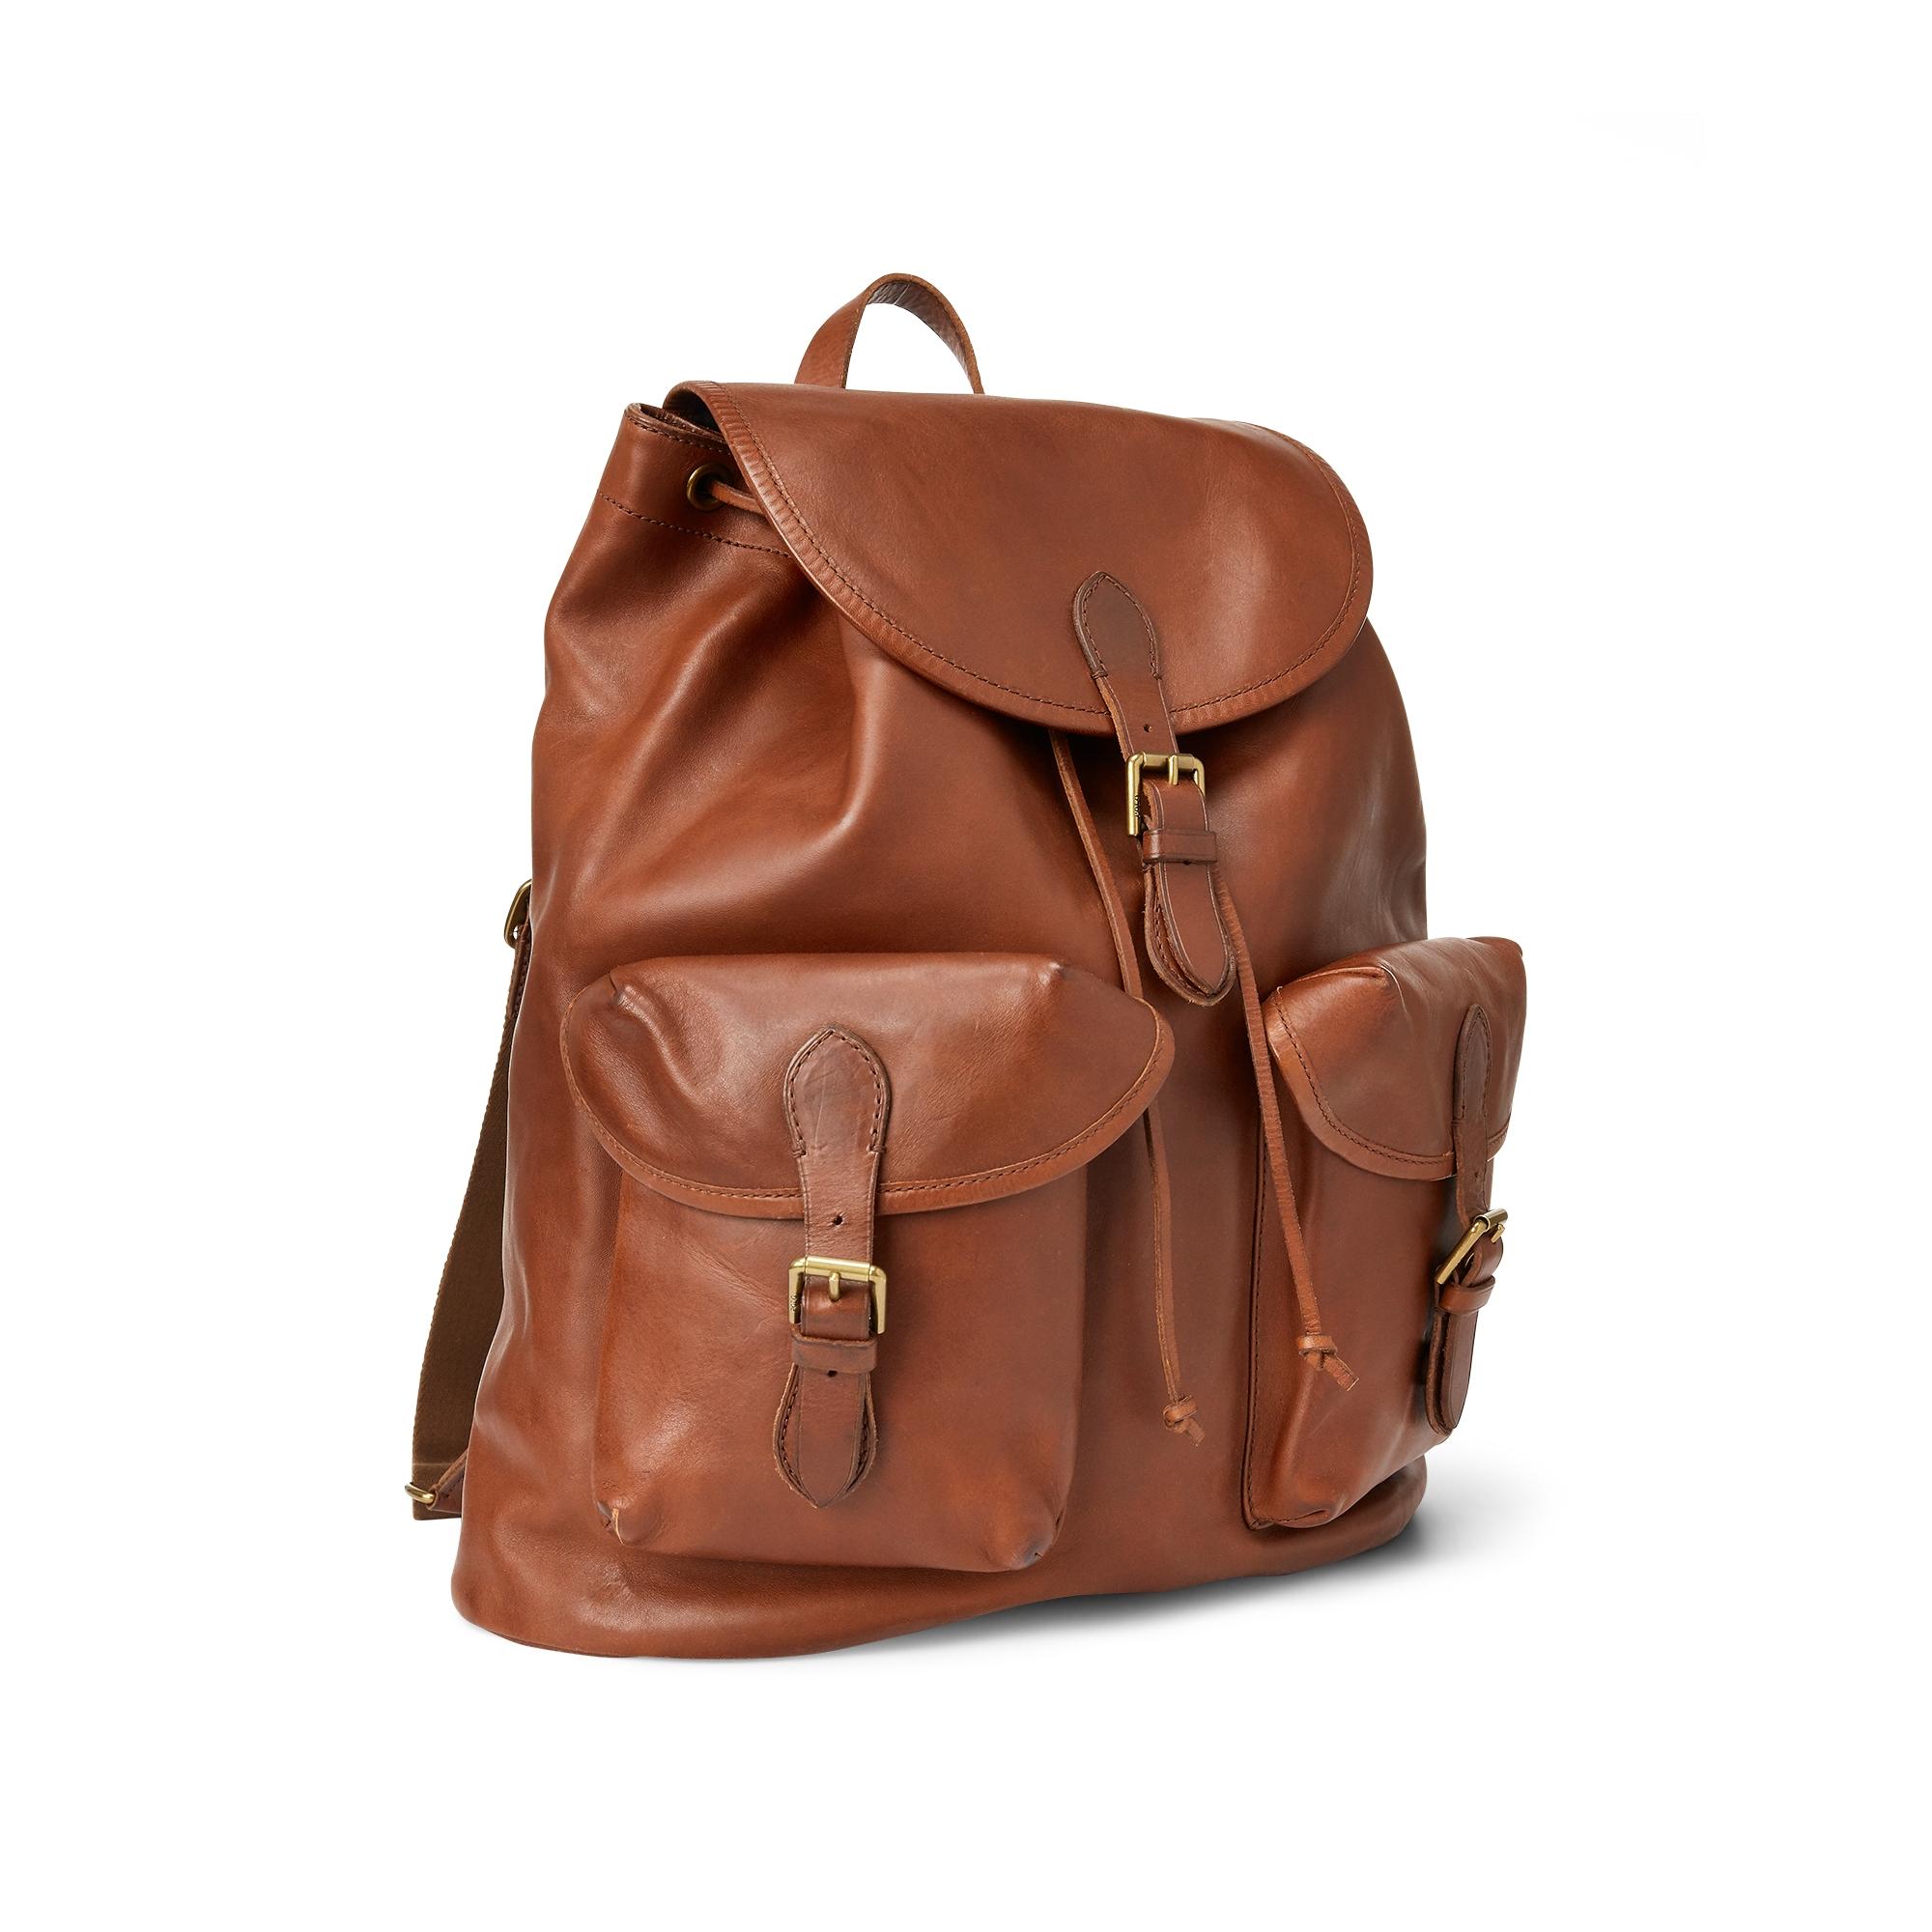 Polo Ralph Lauren Heritage Leather Backpack in Brown for Men - Lyst